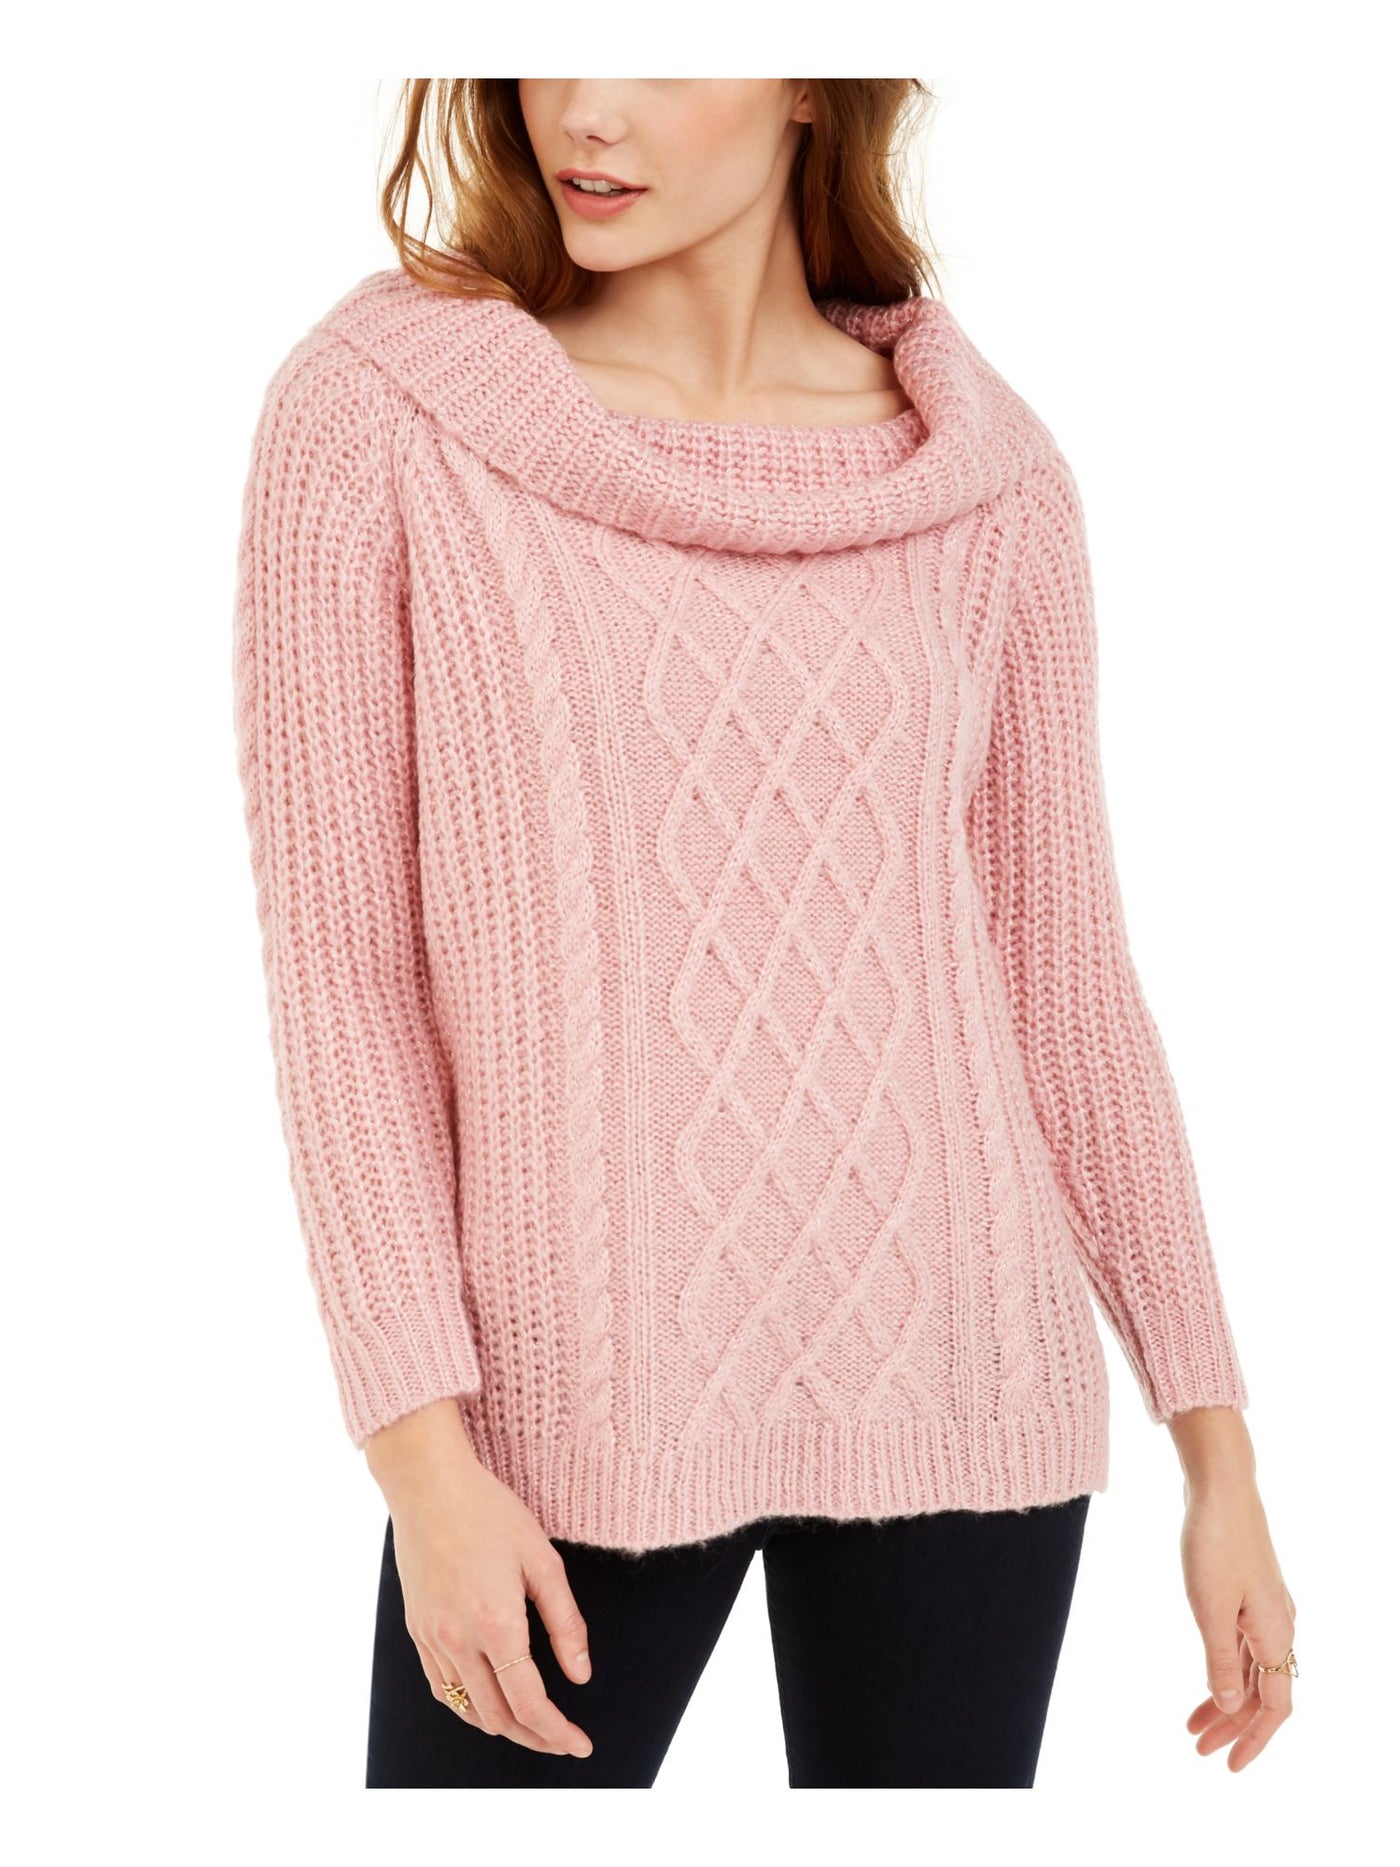 NO COMMENT Pink Off-the-Shoulder Slouchy Cable Knit Metallic Sweater Juniors M